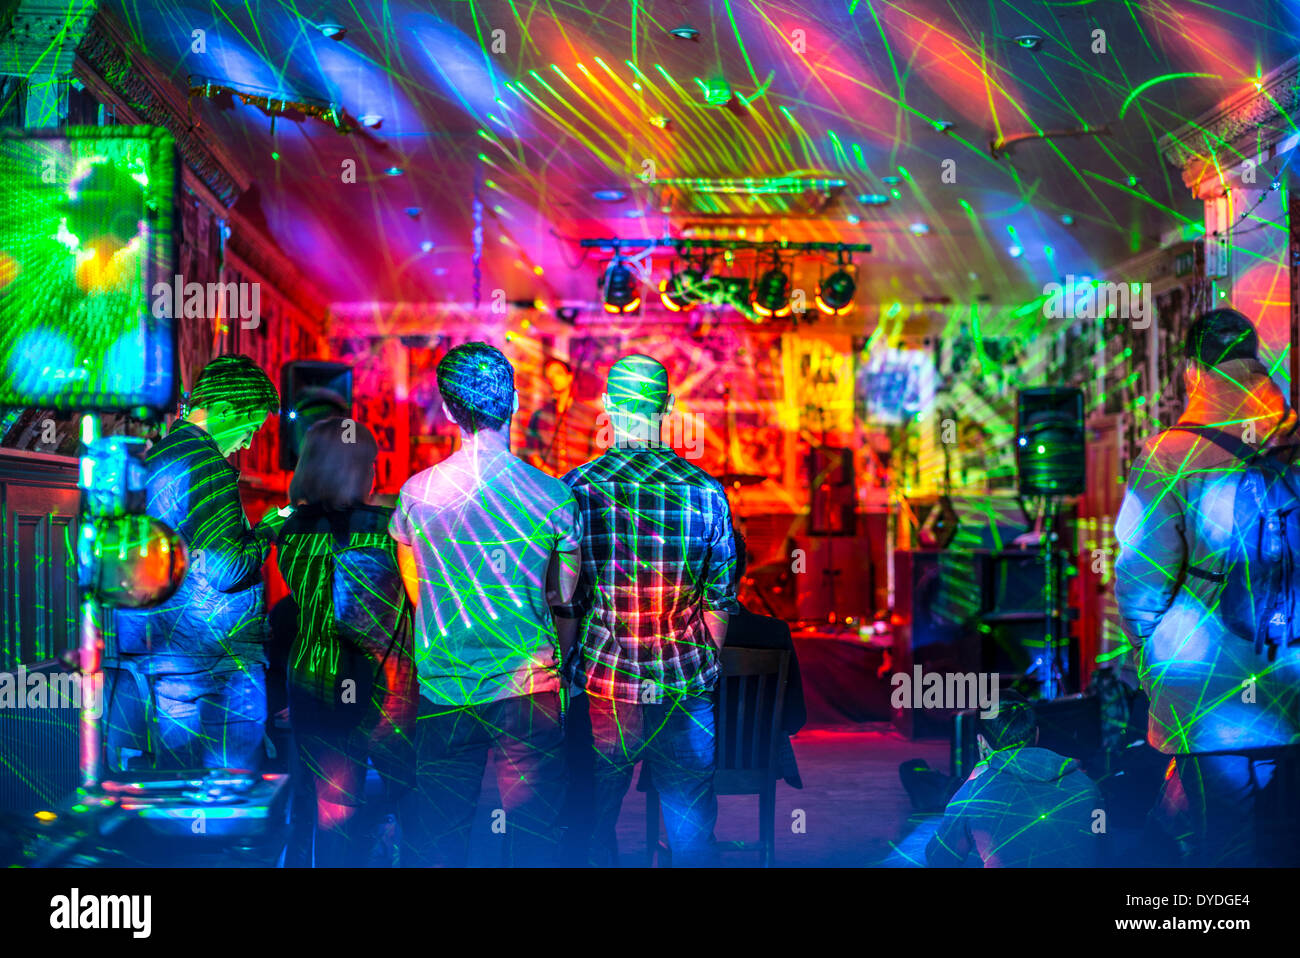 Watching a live performance in a small bar. Stock Photo